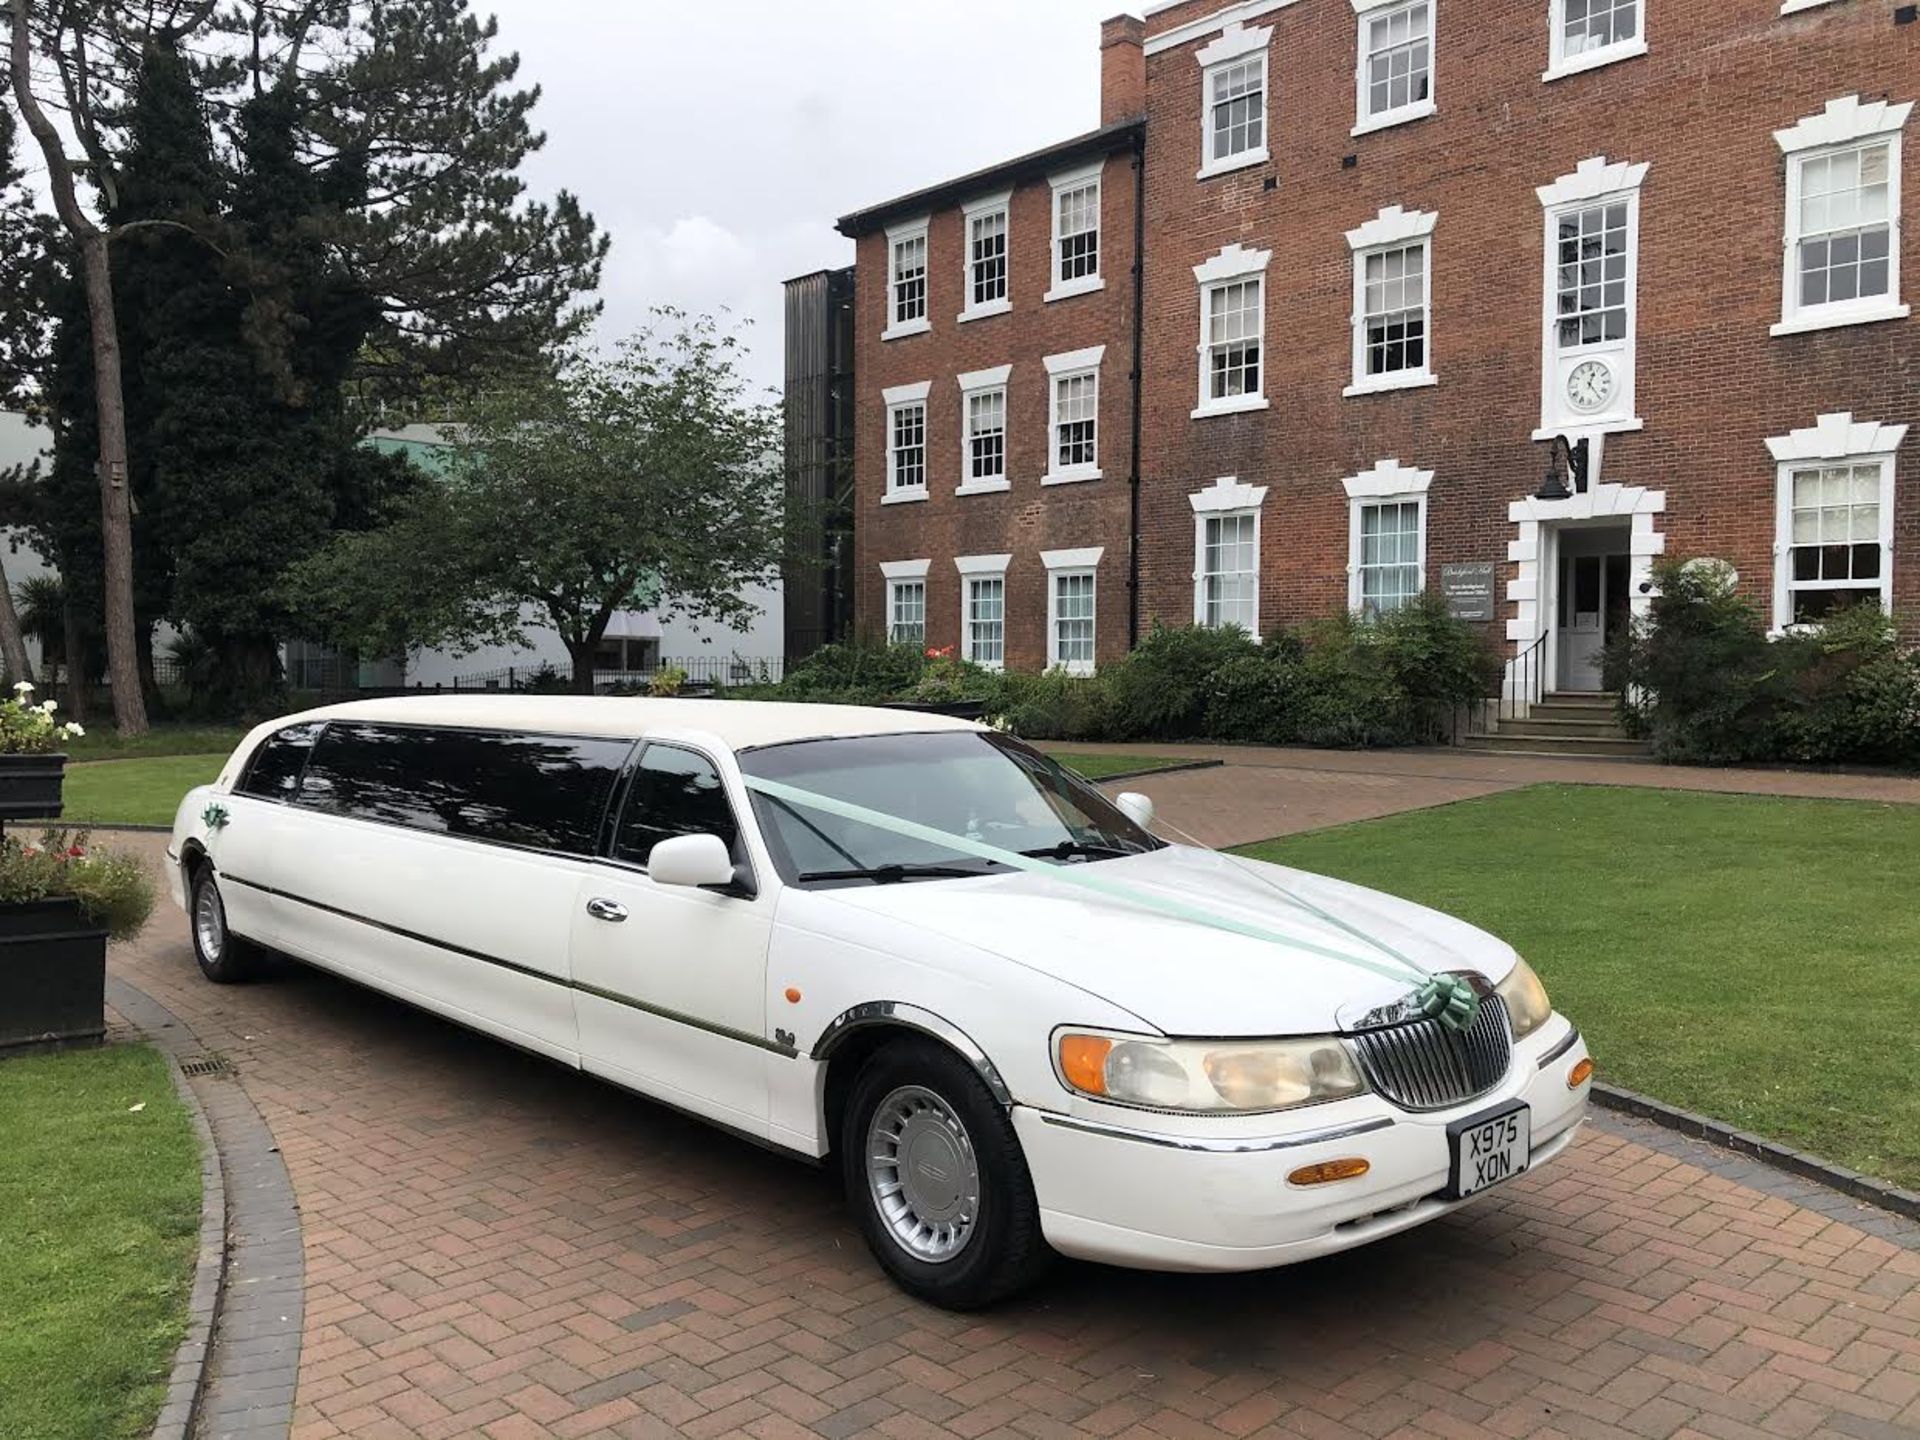 2001 LINCOLN TOWN CAR AUTO WHITE 10 SEATER LIMOUSINE WEDDING CAR *NO VAT* - Image 8 of 17